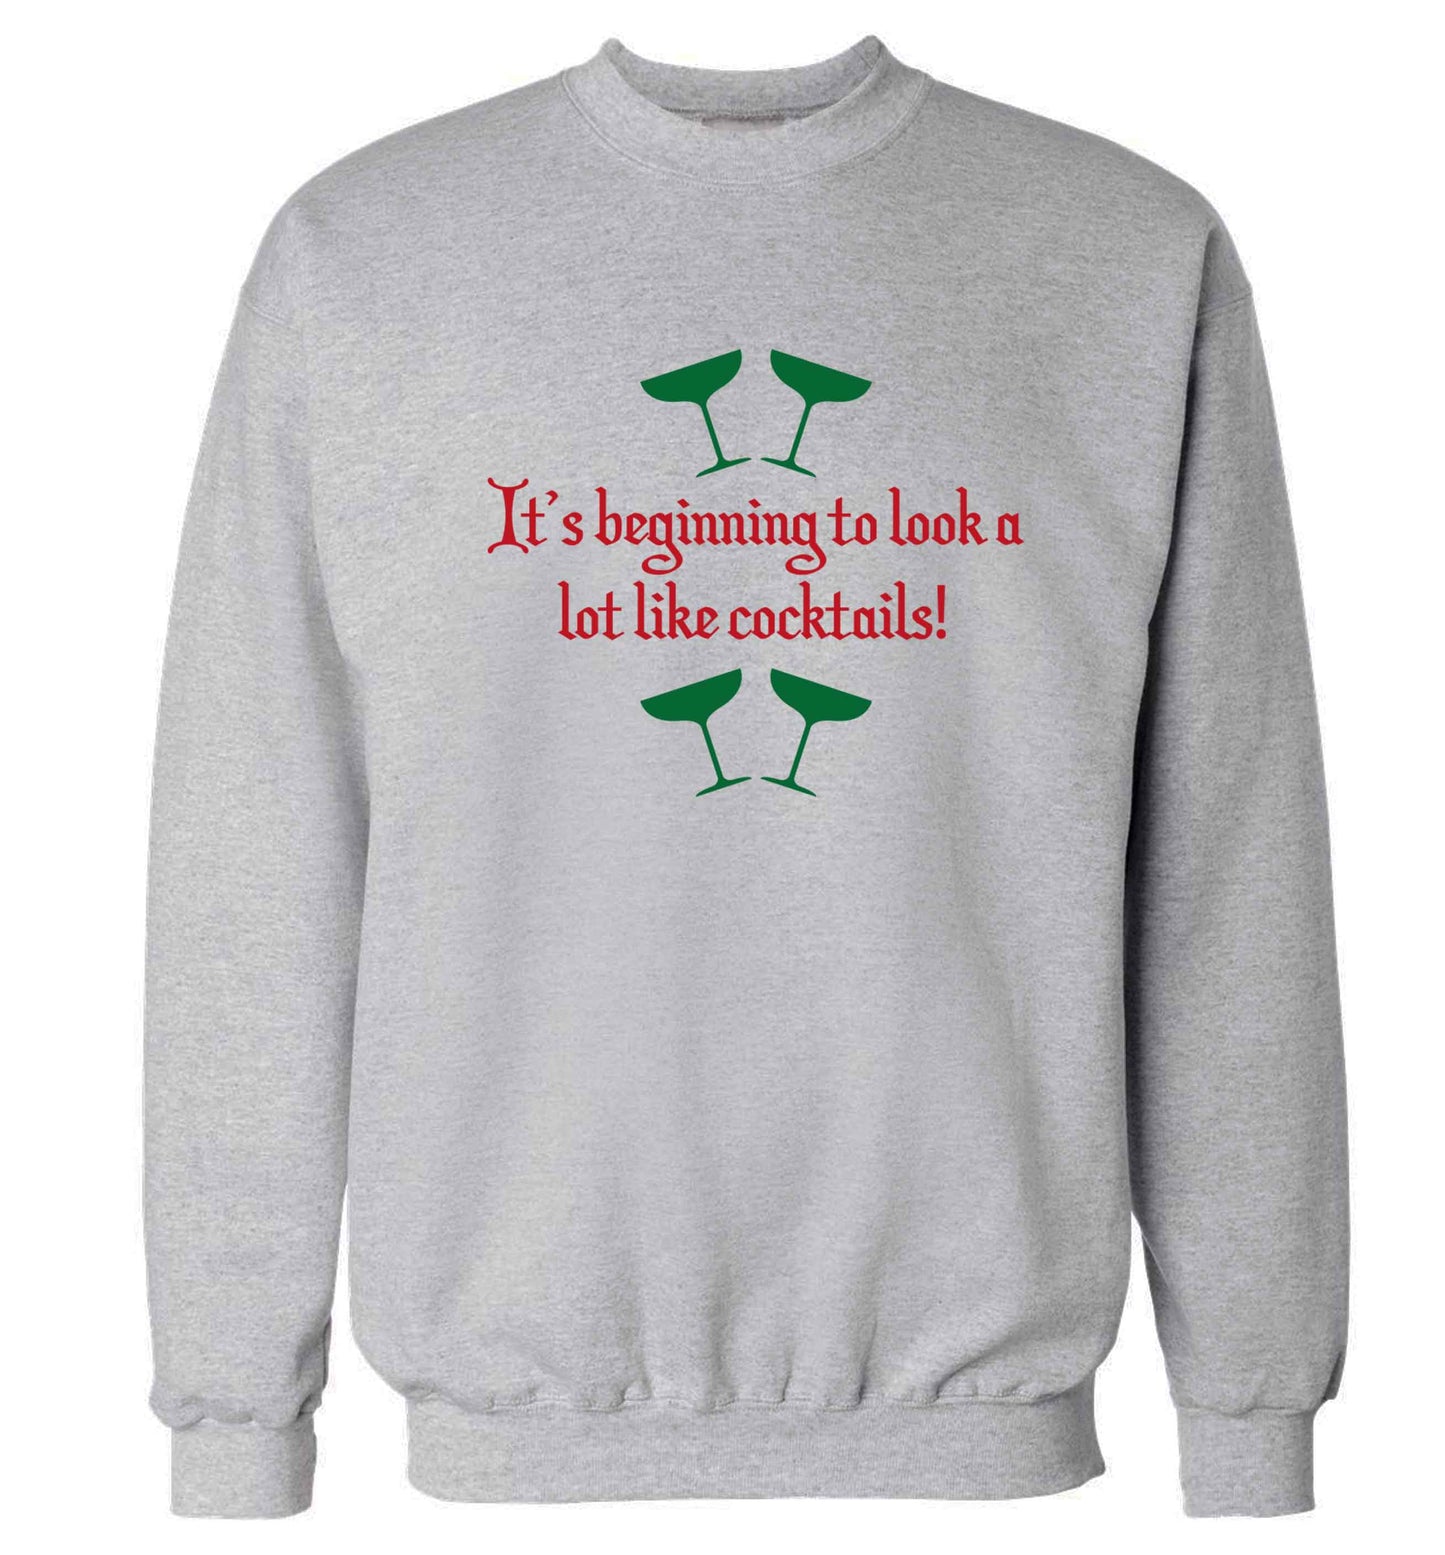 It's beginning to look a lot like cocktails Adult's unisex grey Sweater 2XL